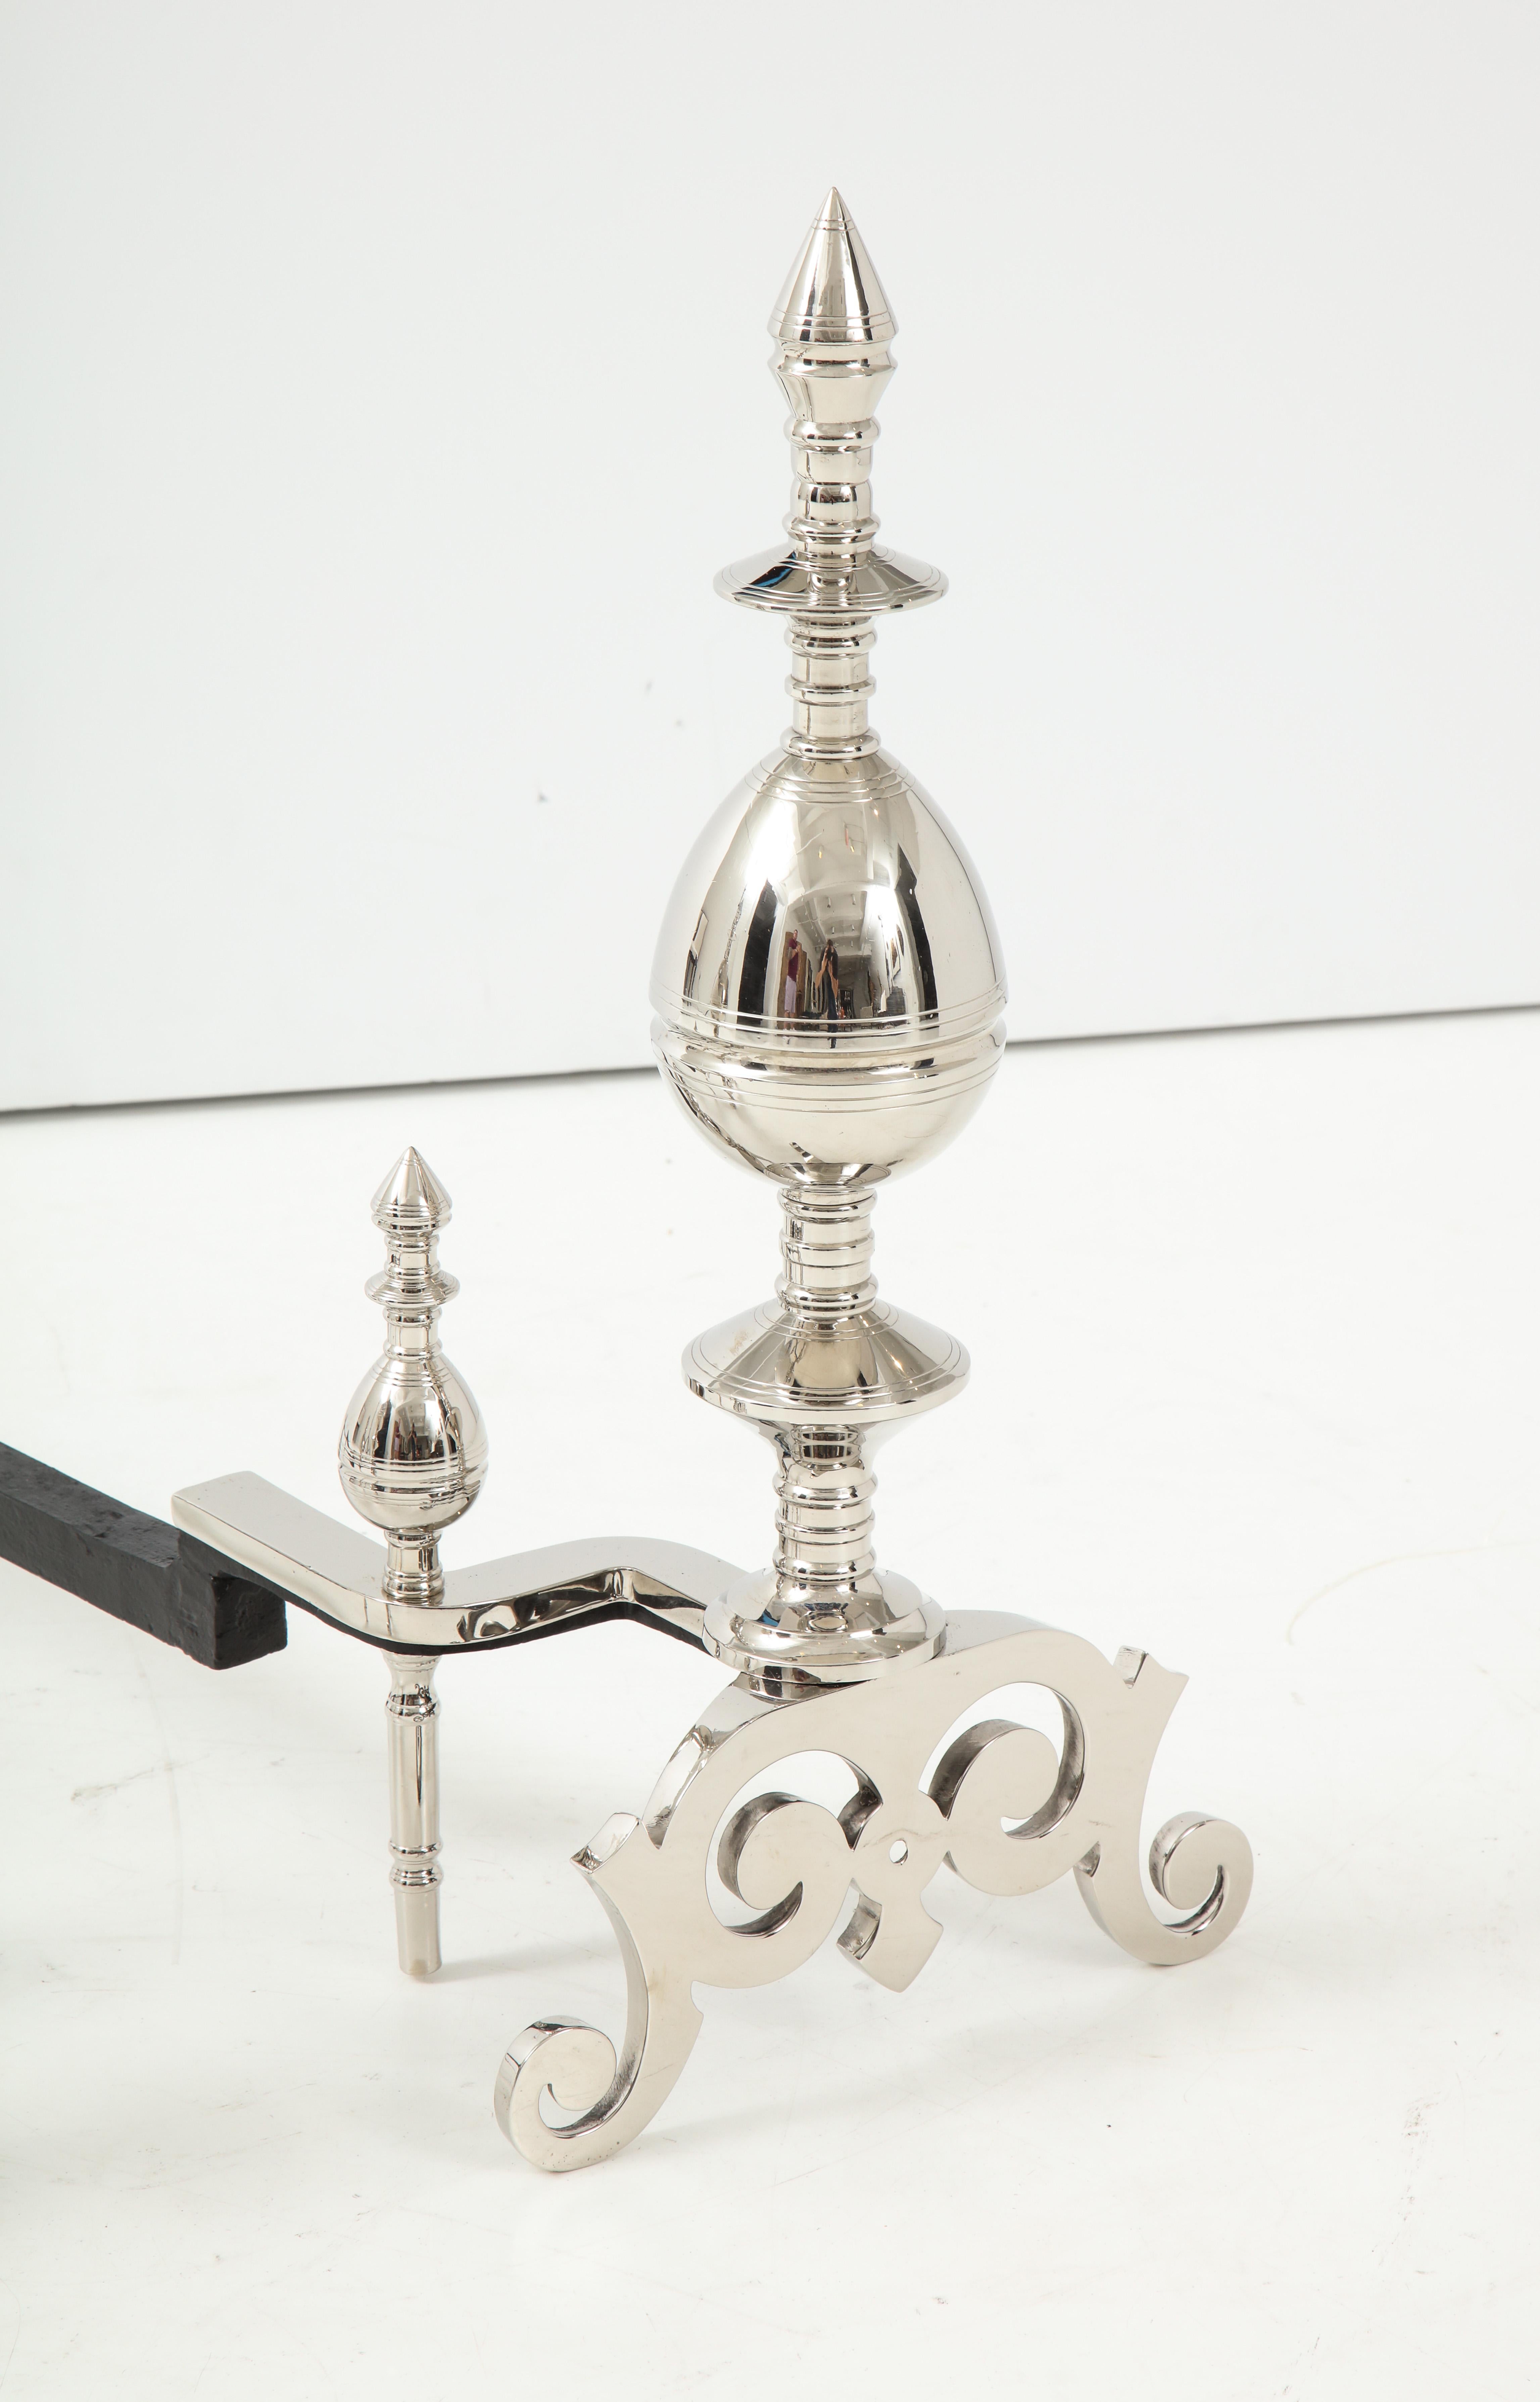 20th Century Art Deco Polished Nickel Spire Topped Andirons For Sale